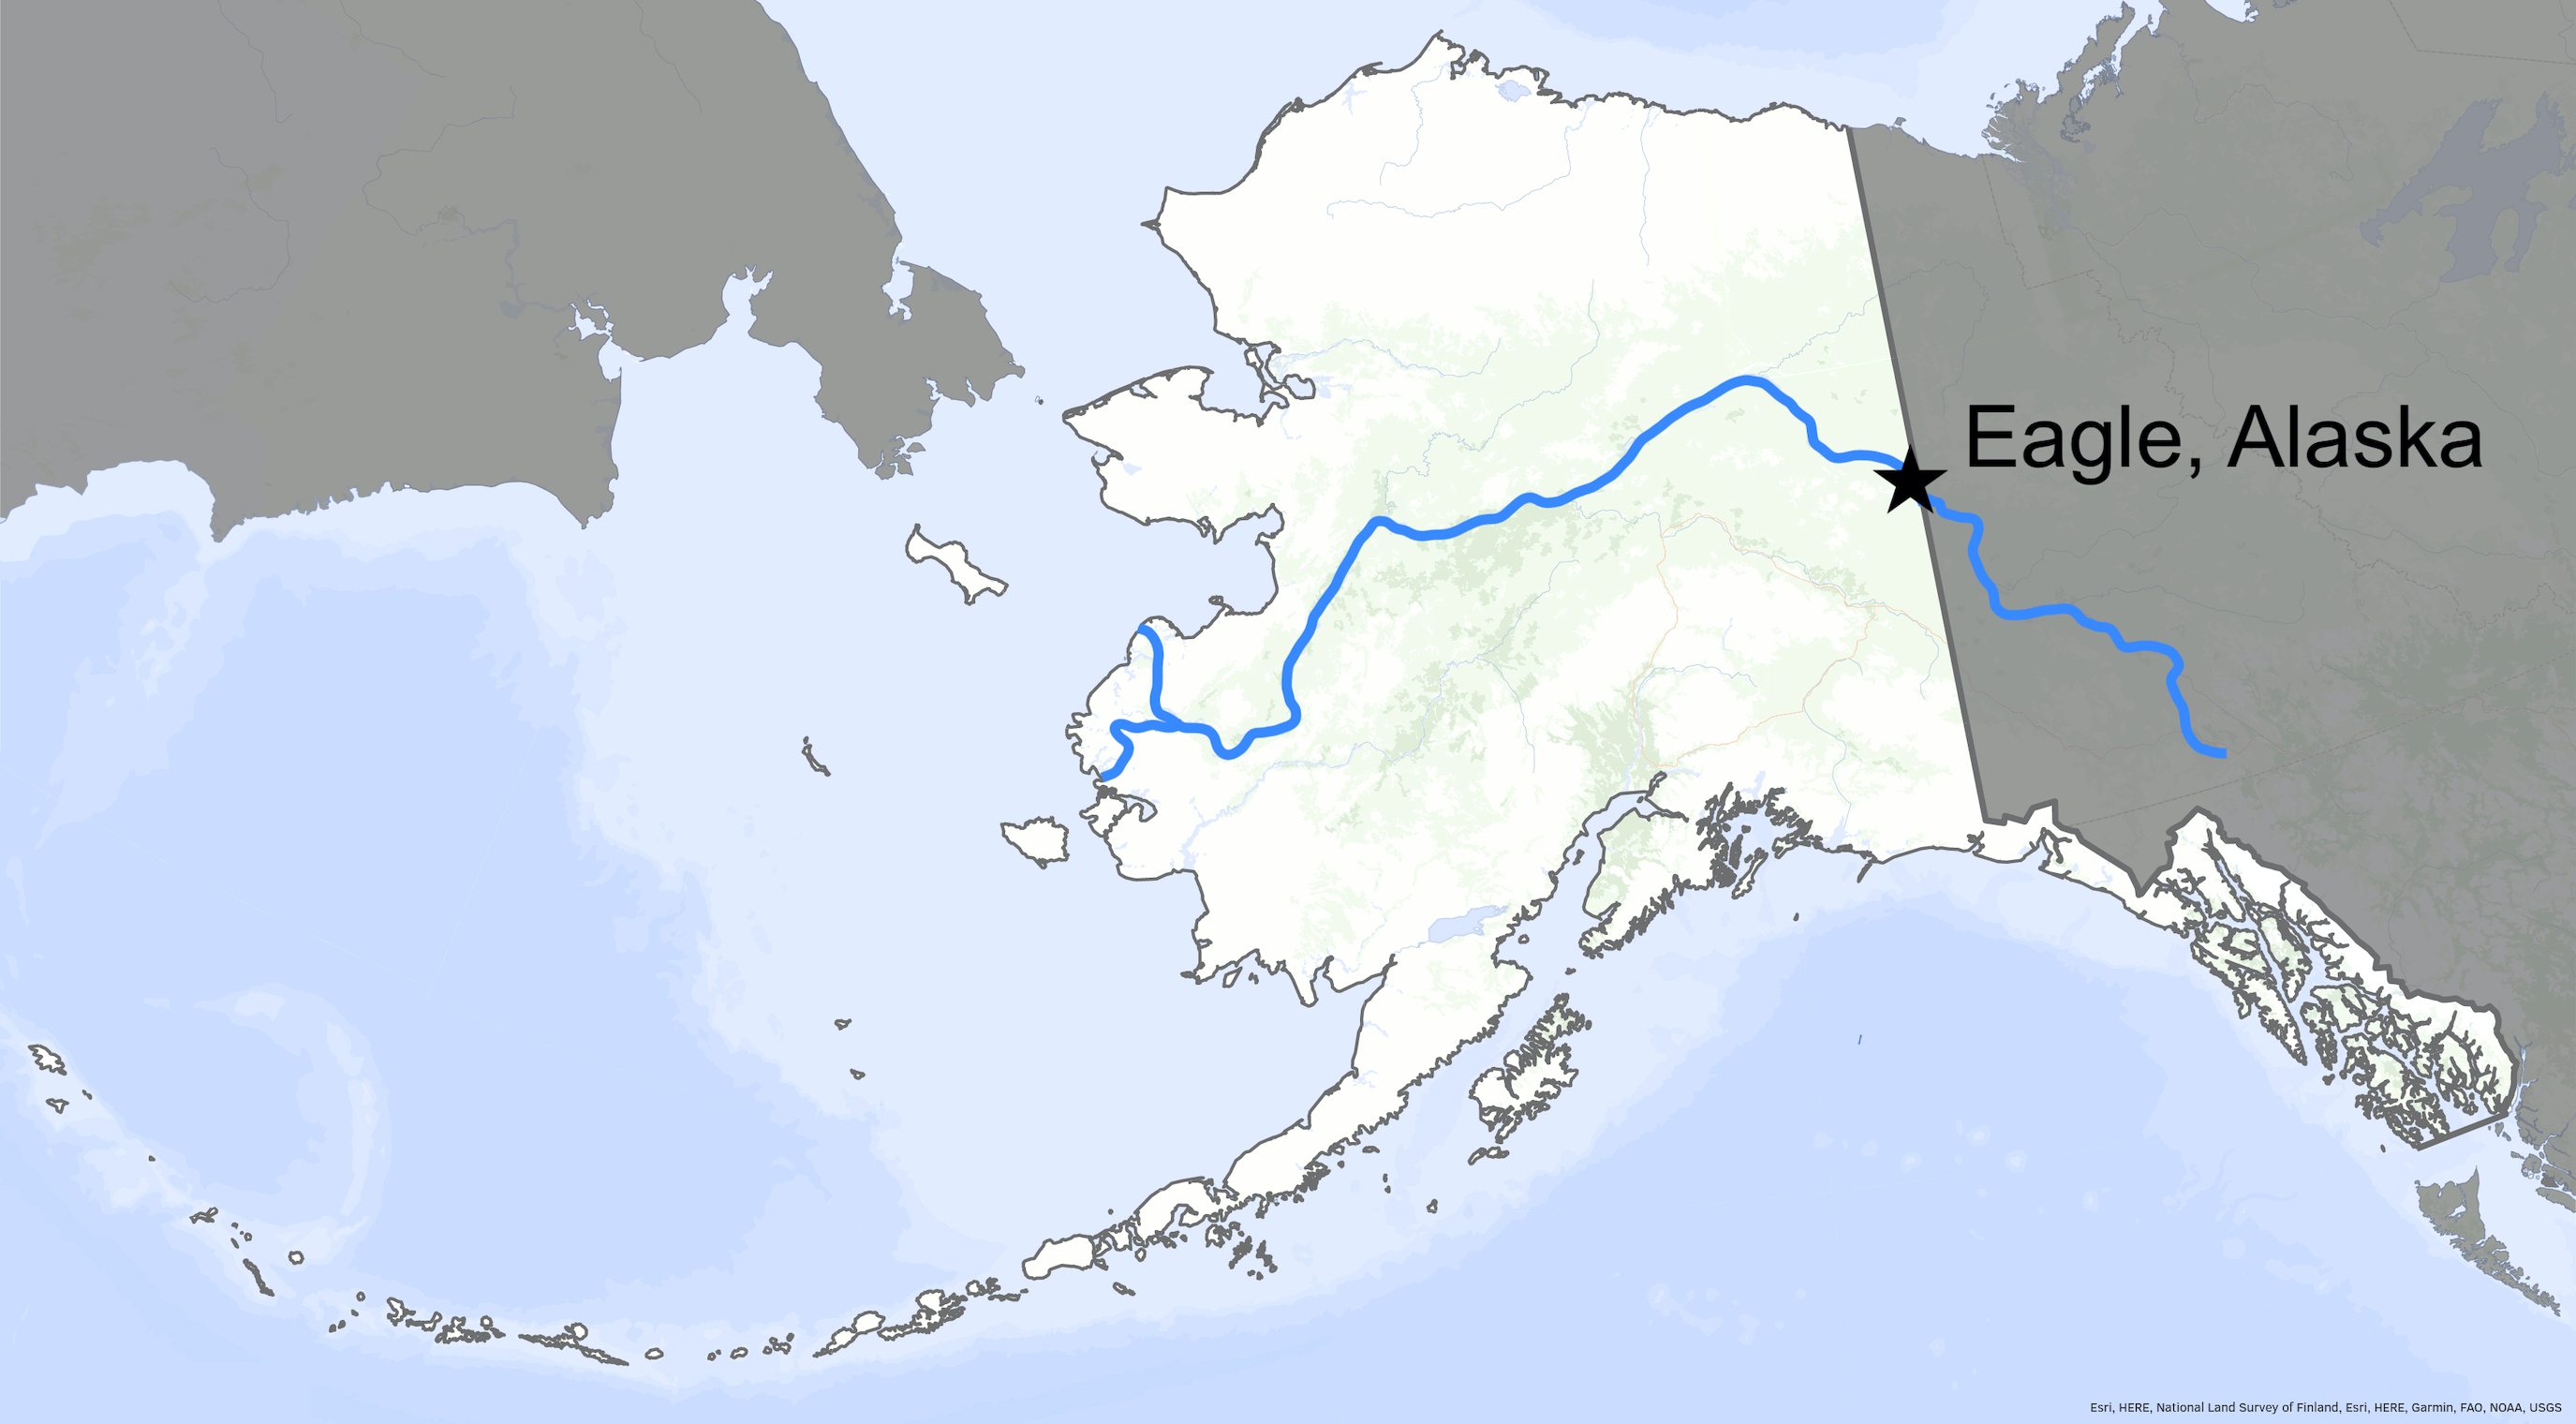 A map of Alaska shows the location of the town of Eagle, near the border with Canada, and the course of the Yukon River through the state.